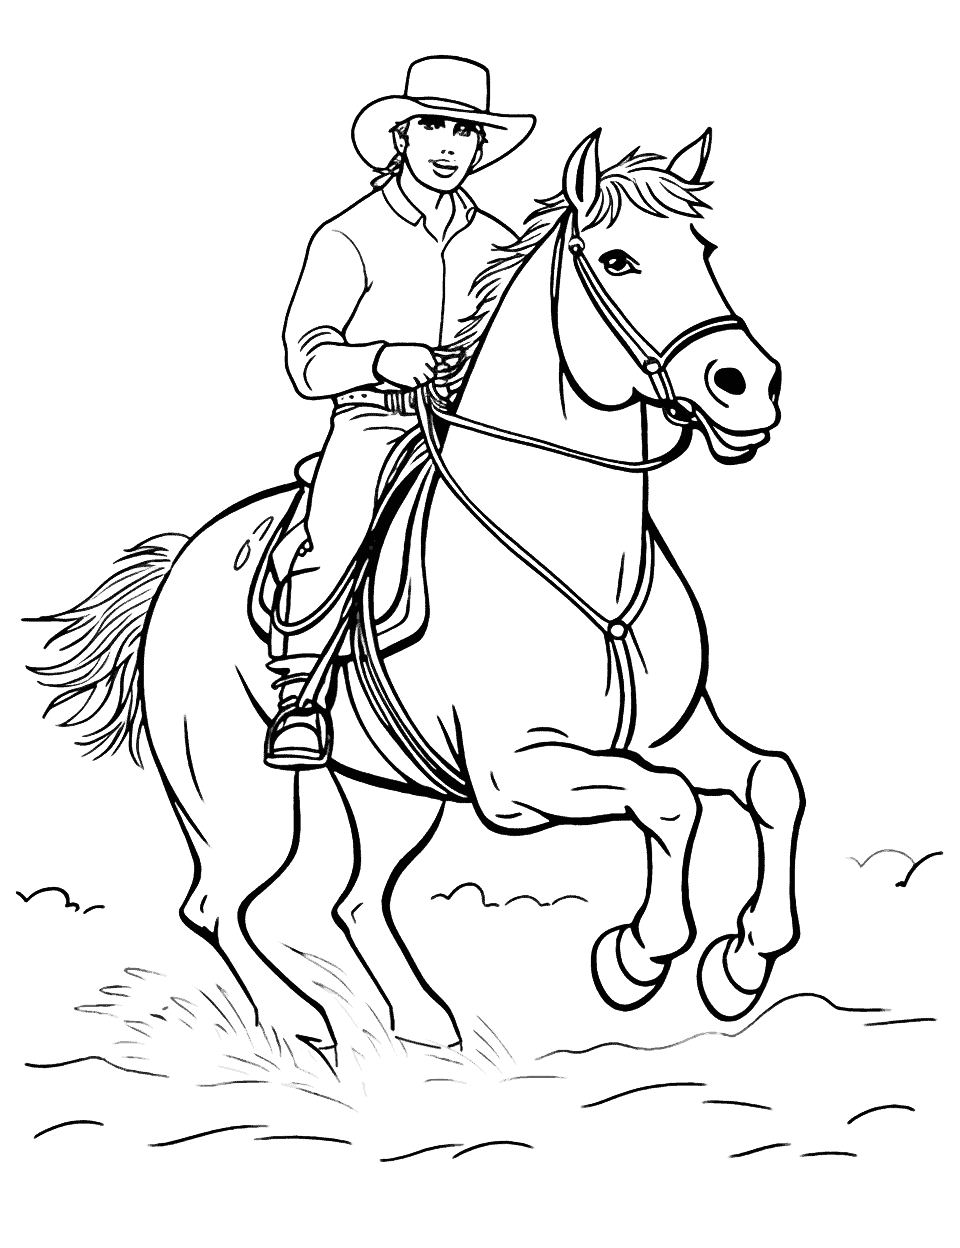 Rodeo Roundup Coloring Page - A rodeo scene with a cowboy skillfully riding a bucking bronco.